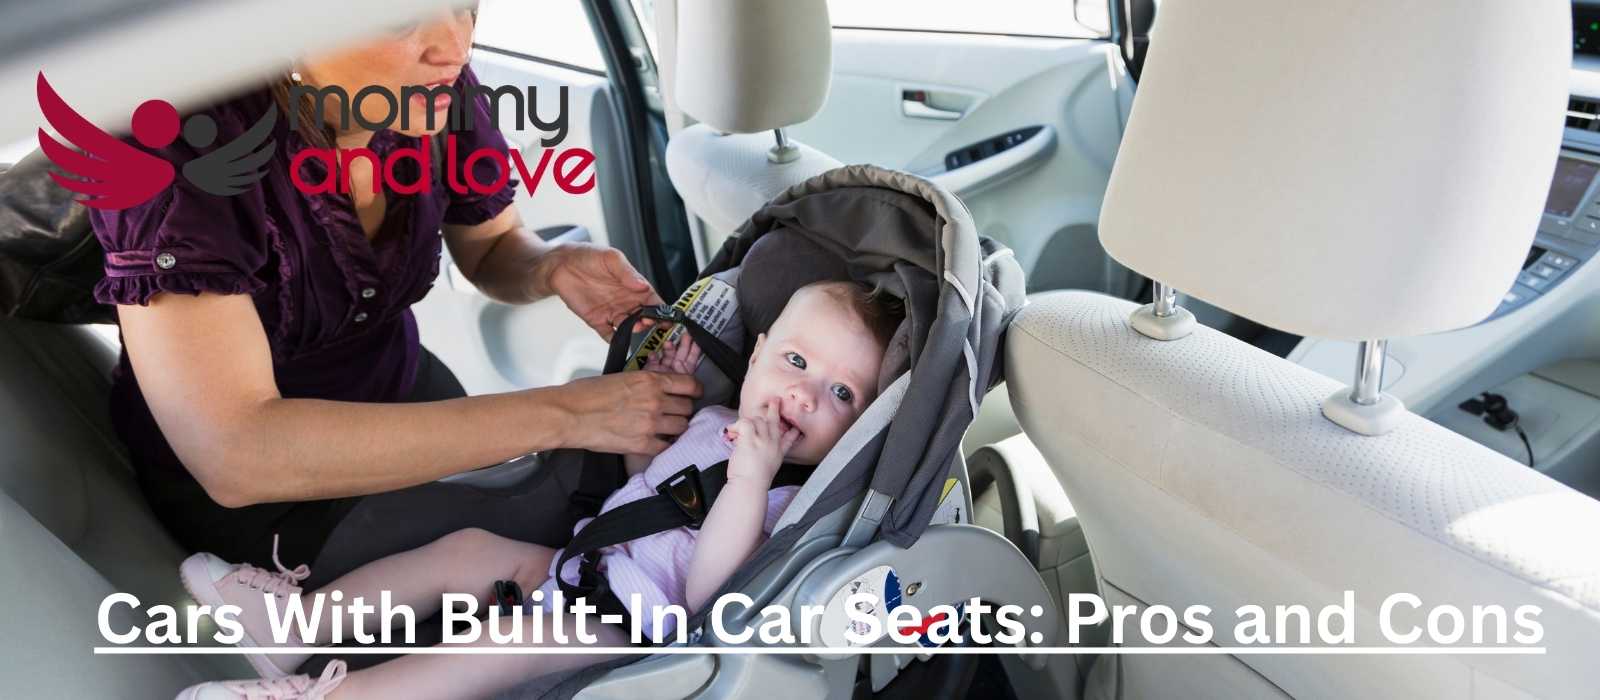 Cars With Built-In Car Seats: Pros and Cons